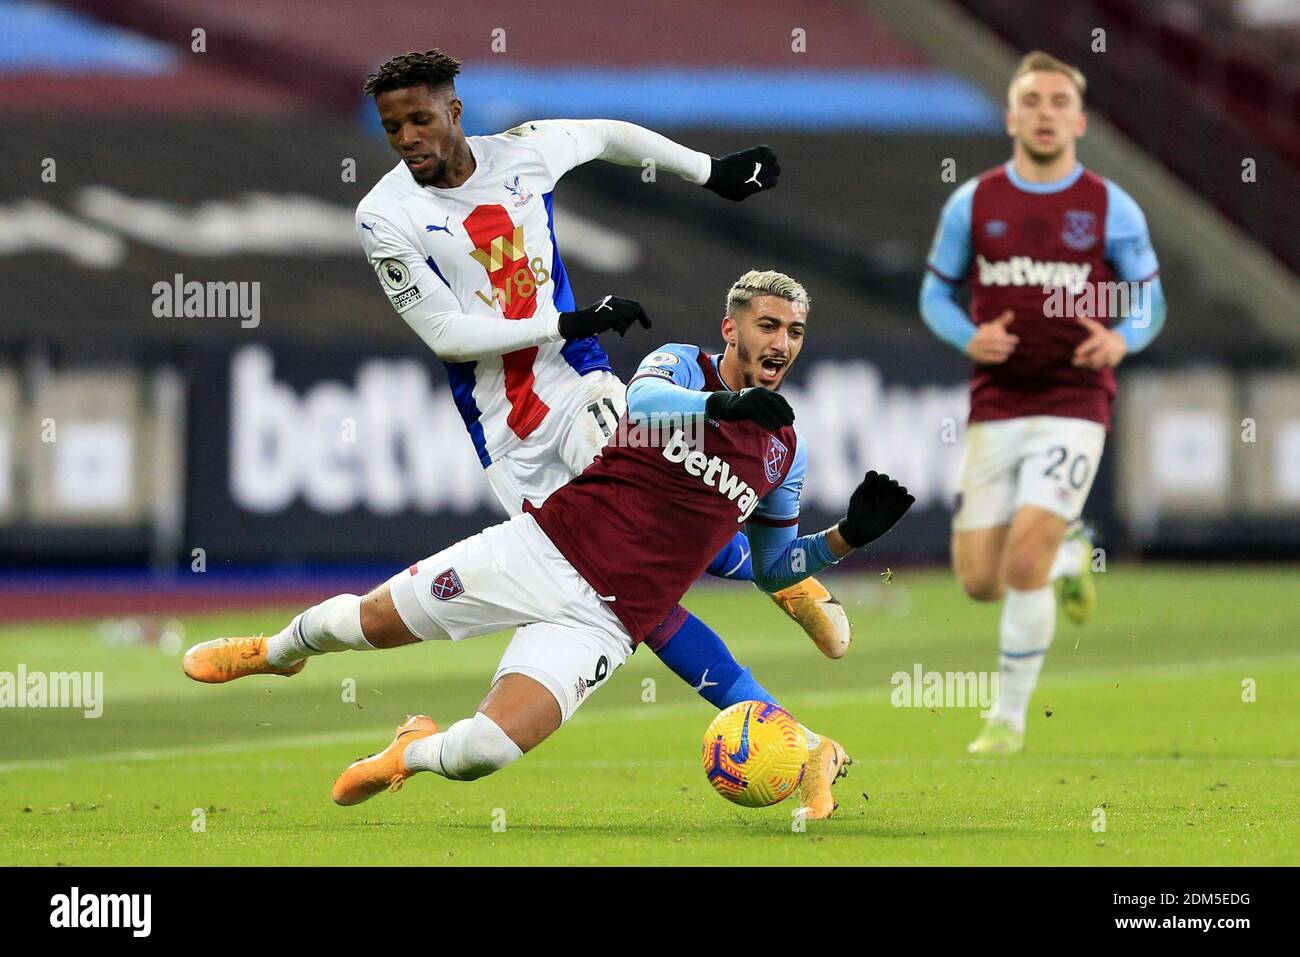 West Ham United's Said Benrahma and Crystal Palace's Wilfried Zaha battle for the ball during the Premier League match at the London Stadium. Stock Photo